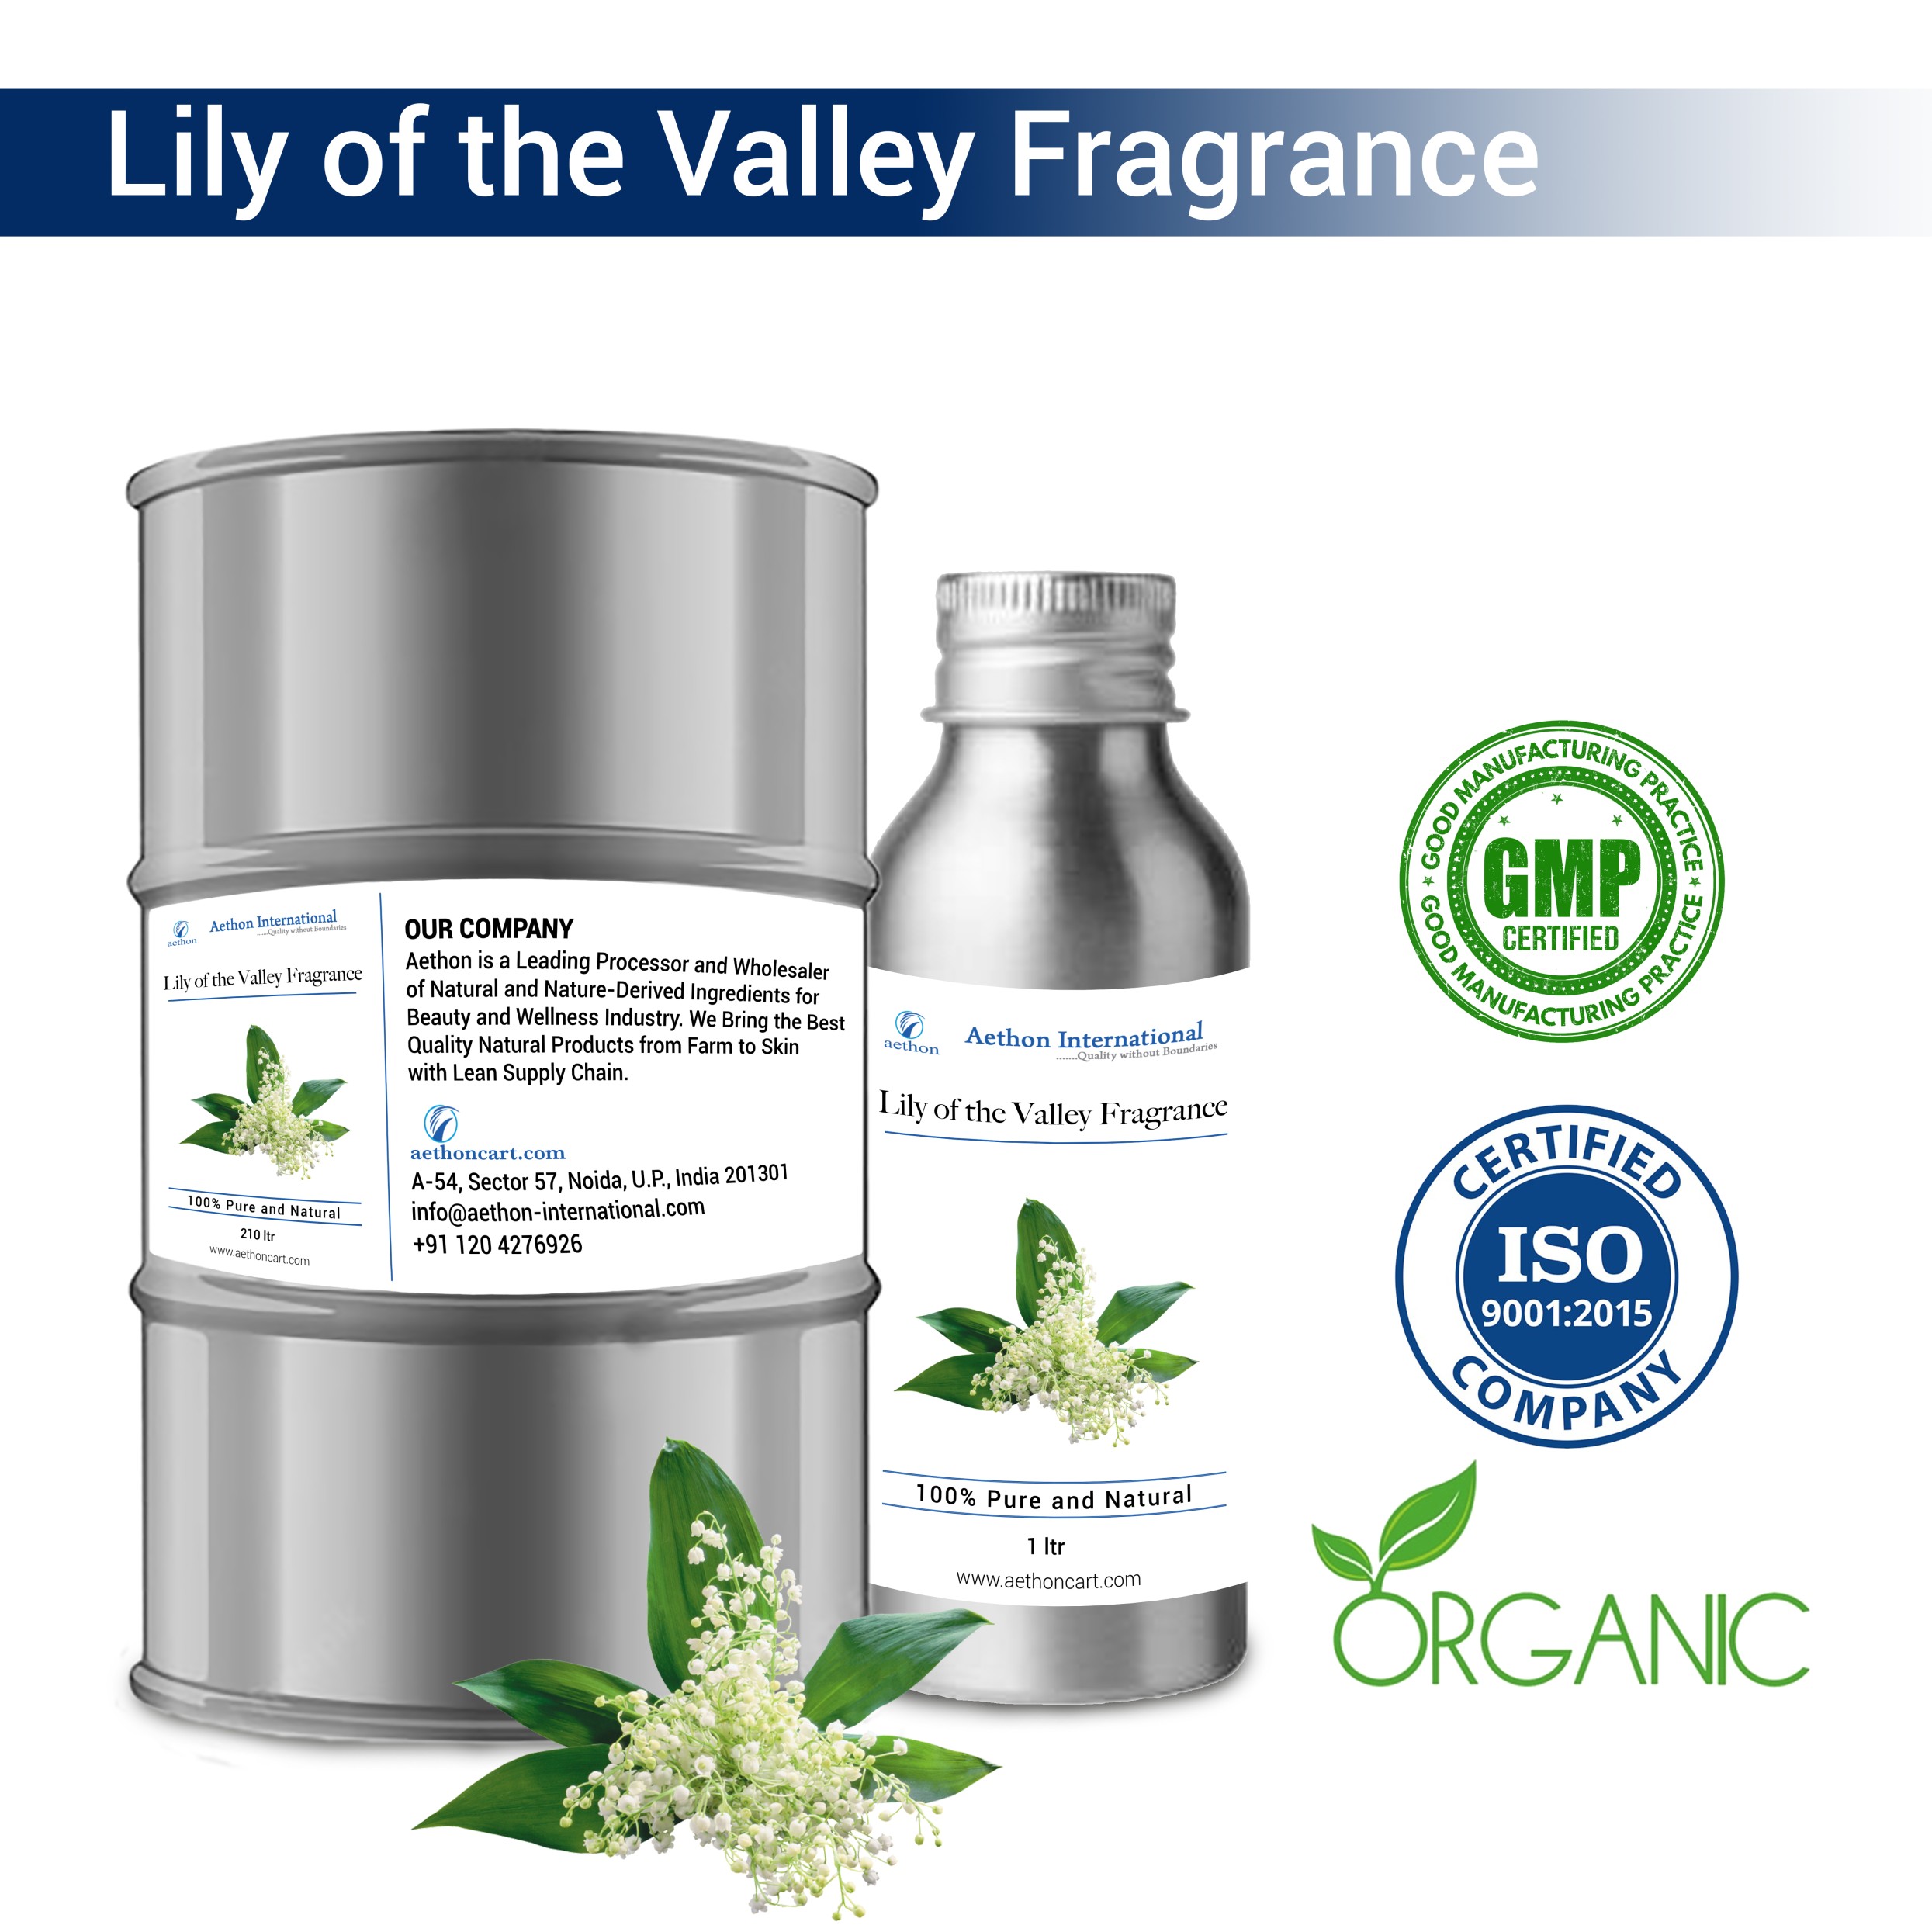 Lily of the Valley Fragrances (WS)